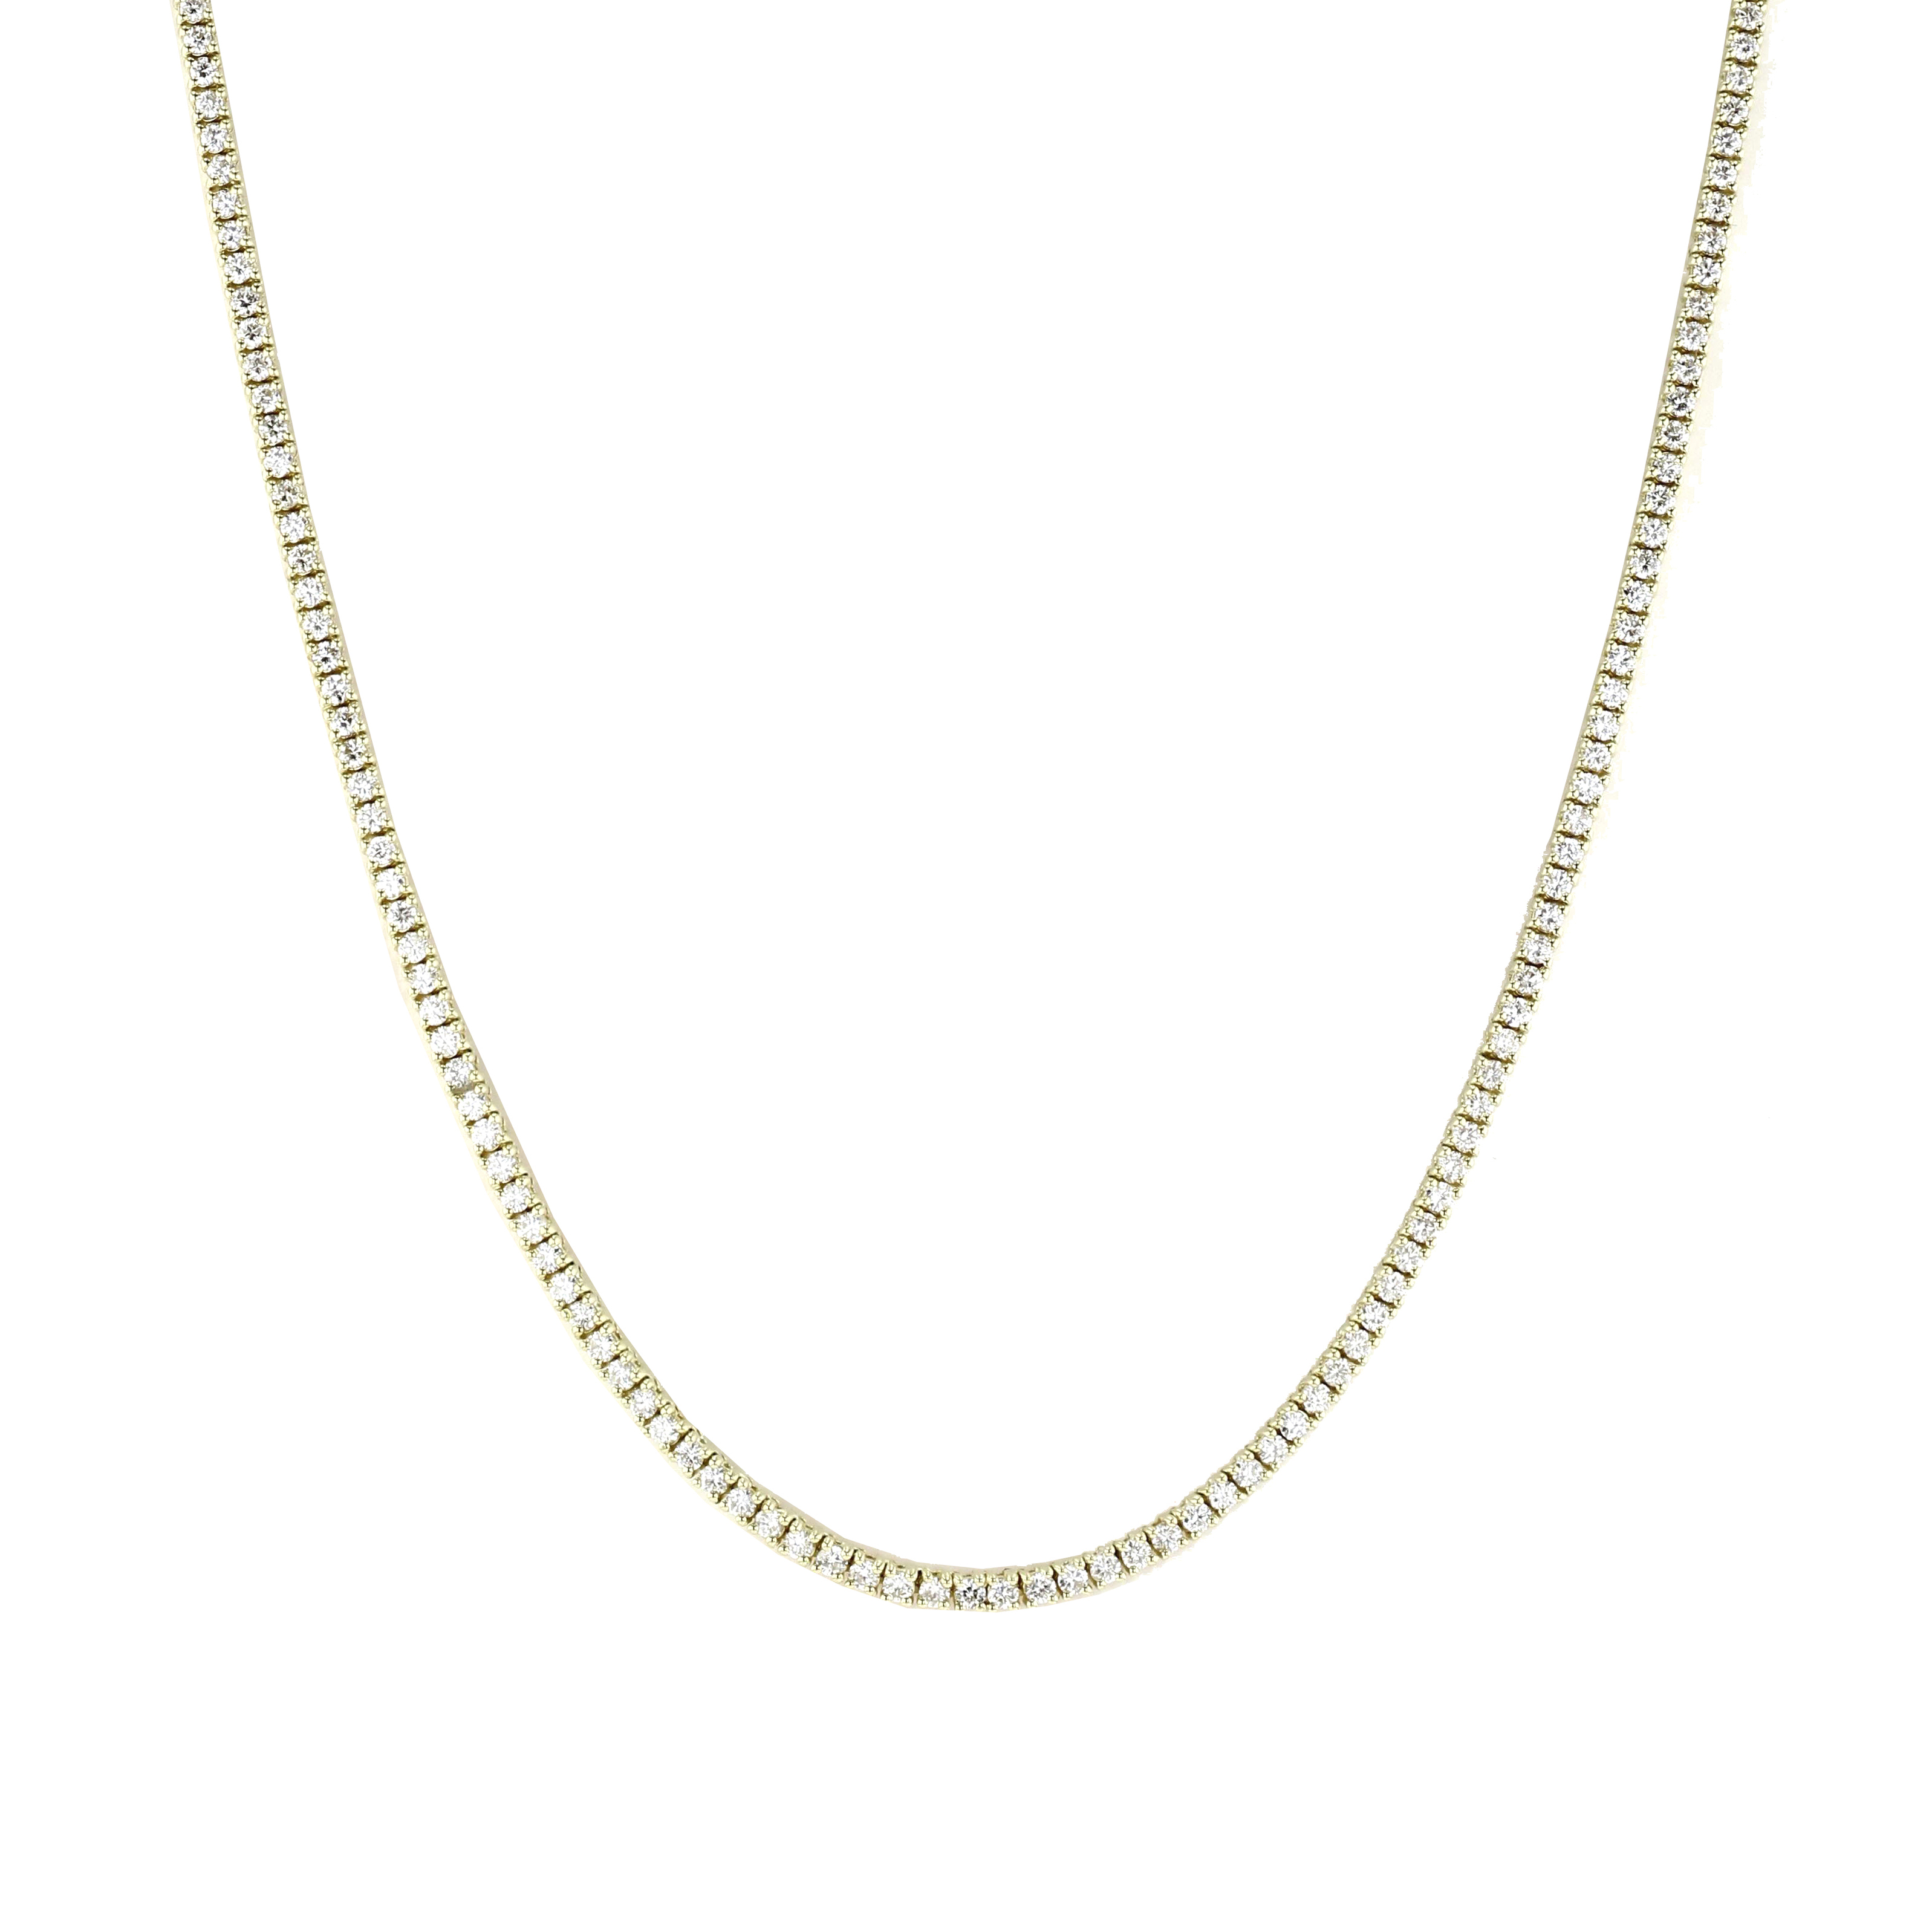 View 6.50ctw Diamond Straight Size Tennis Necklace in 14k Yellow Gold 18 Inches